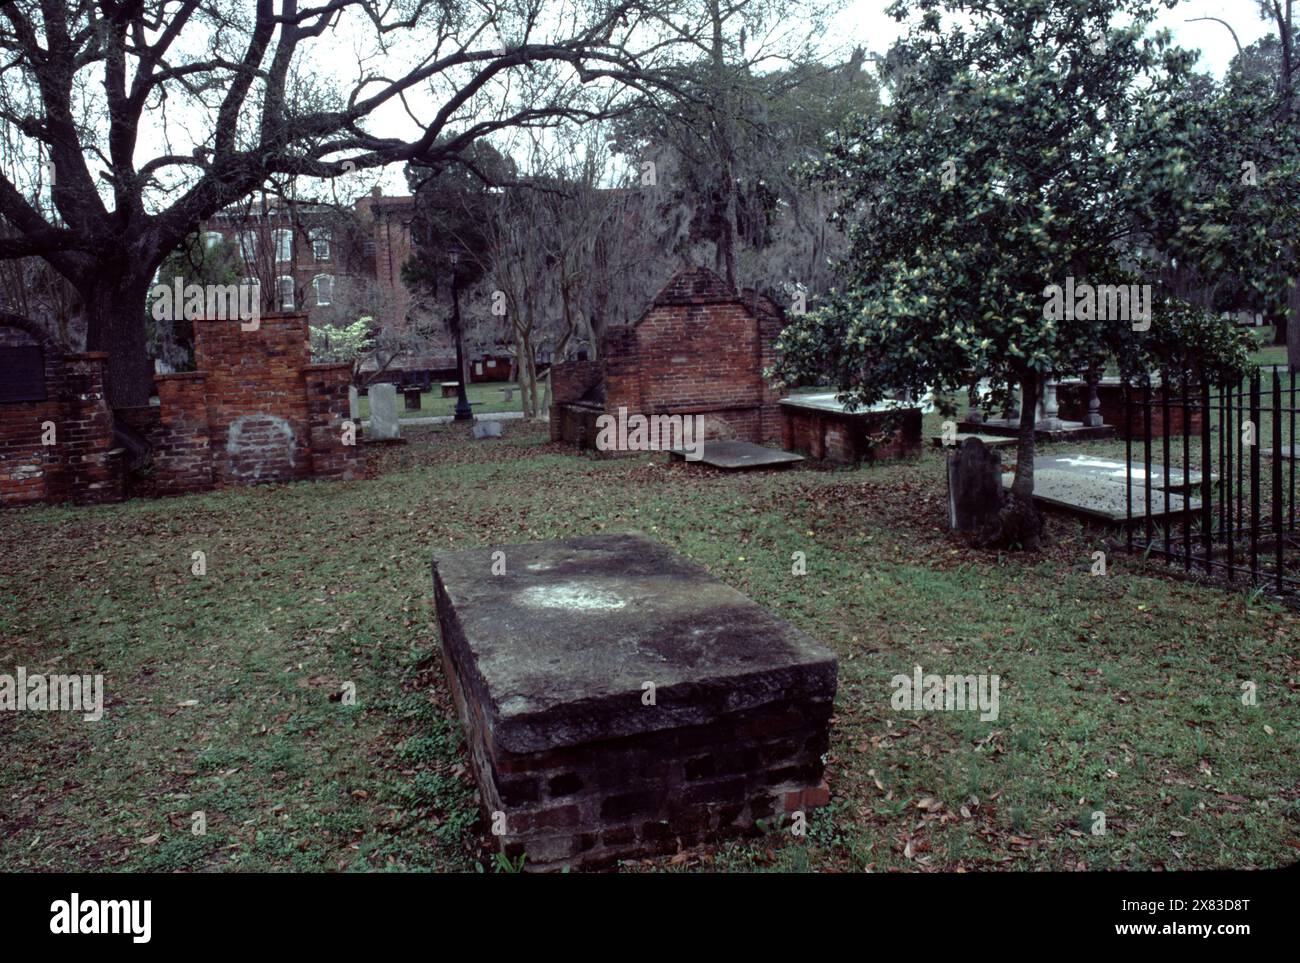 Savannah, GA., USA. 1983. Colonial Park Cemetery is a colonial America cemetery in downtown Savannah, Georgia.  A city park in 1896. The cemetery was established in 1750, when Savannah was the capital of the British Province of Georgia, last of the Thirteen Colonies.  Button Gwinnett (1735–1777), a signer of the Declaration of Independence monument speaks to Colonial Park Cemetery’s Colonial America history! Stock Photo